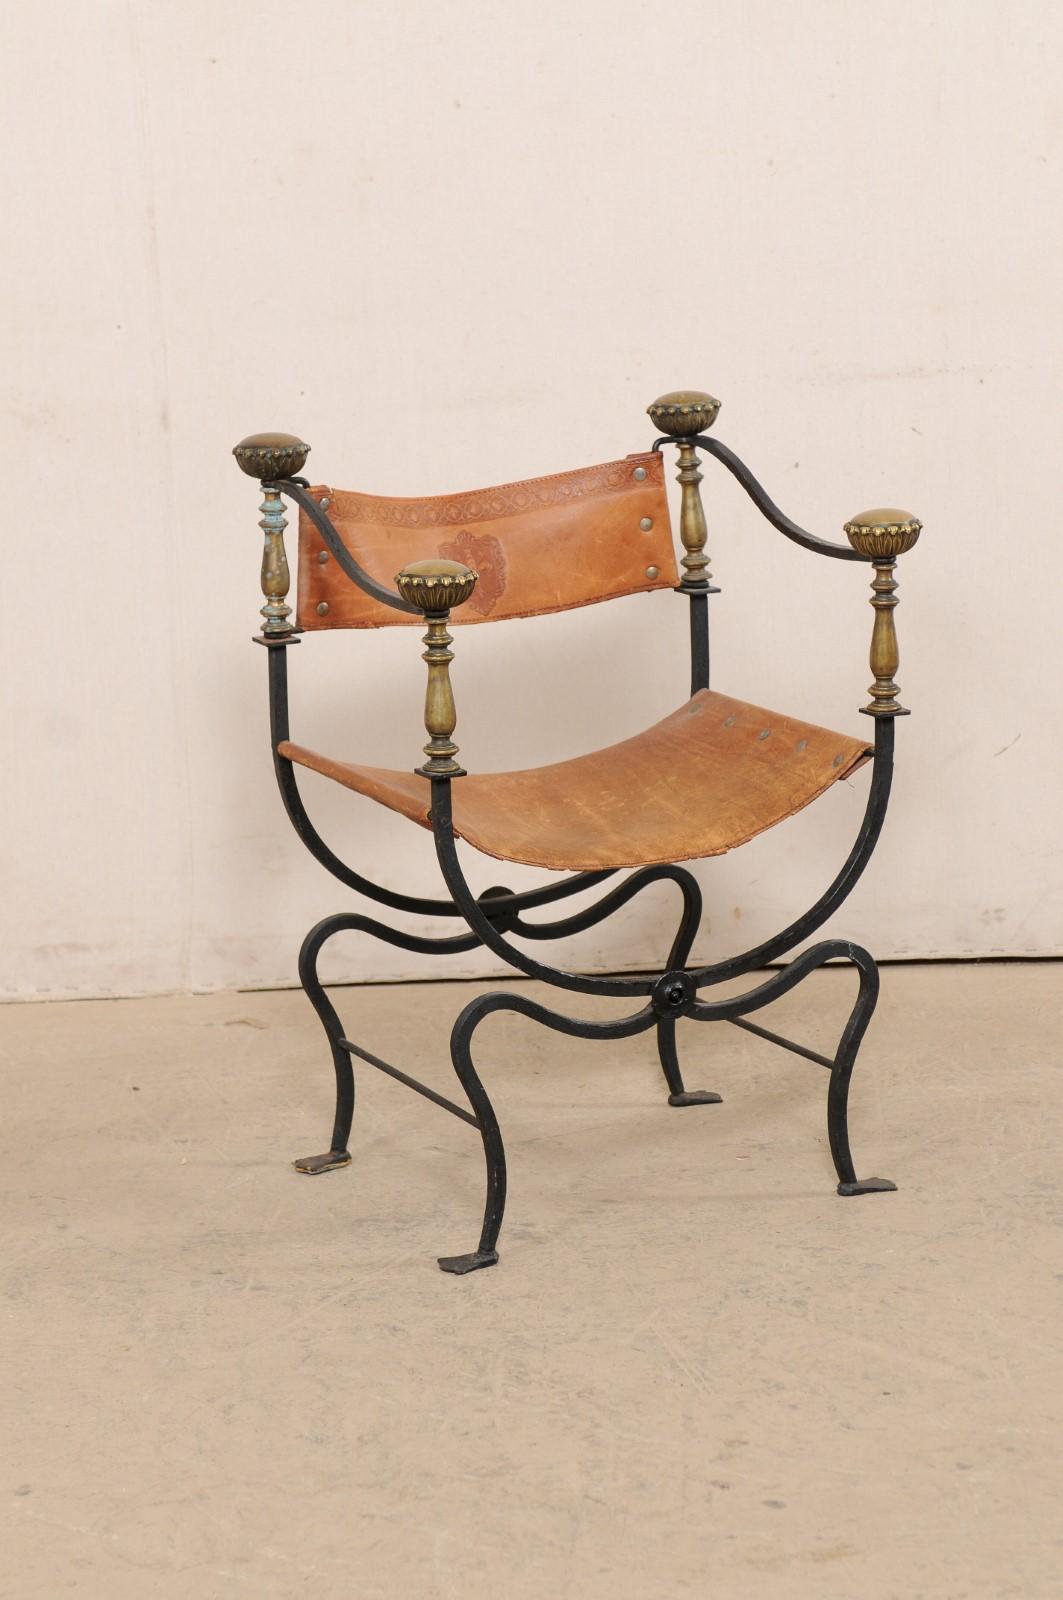 An Italian curule Savonarola iron and embossed leather chair from the early 20th century. This antique curule chair from Italy, also commonly called a Savonarola, is defined by the signature frame which upper support curves down half way to meet and